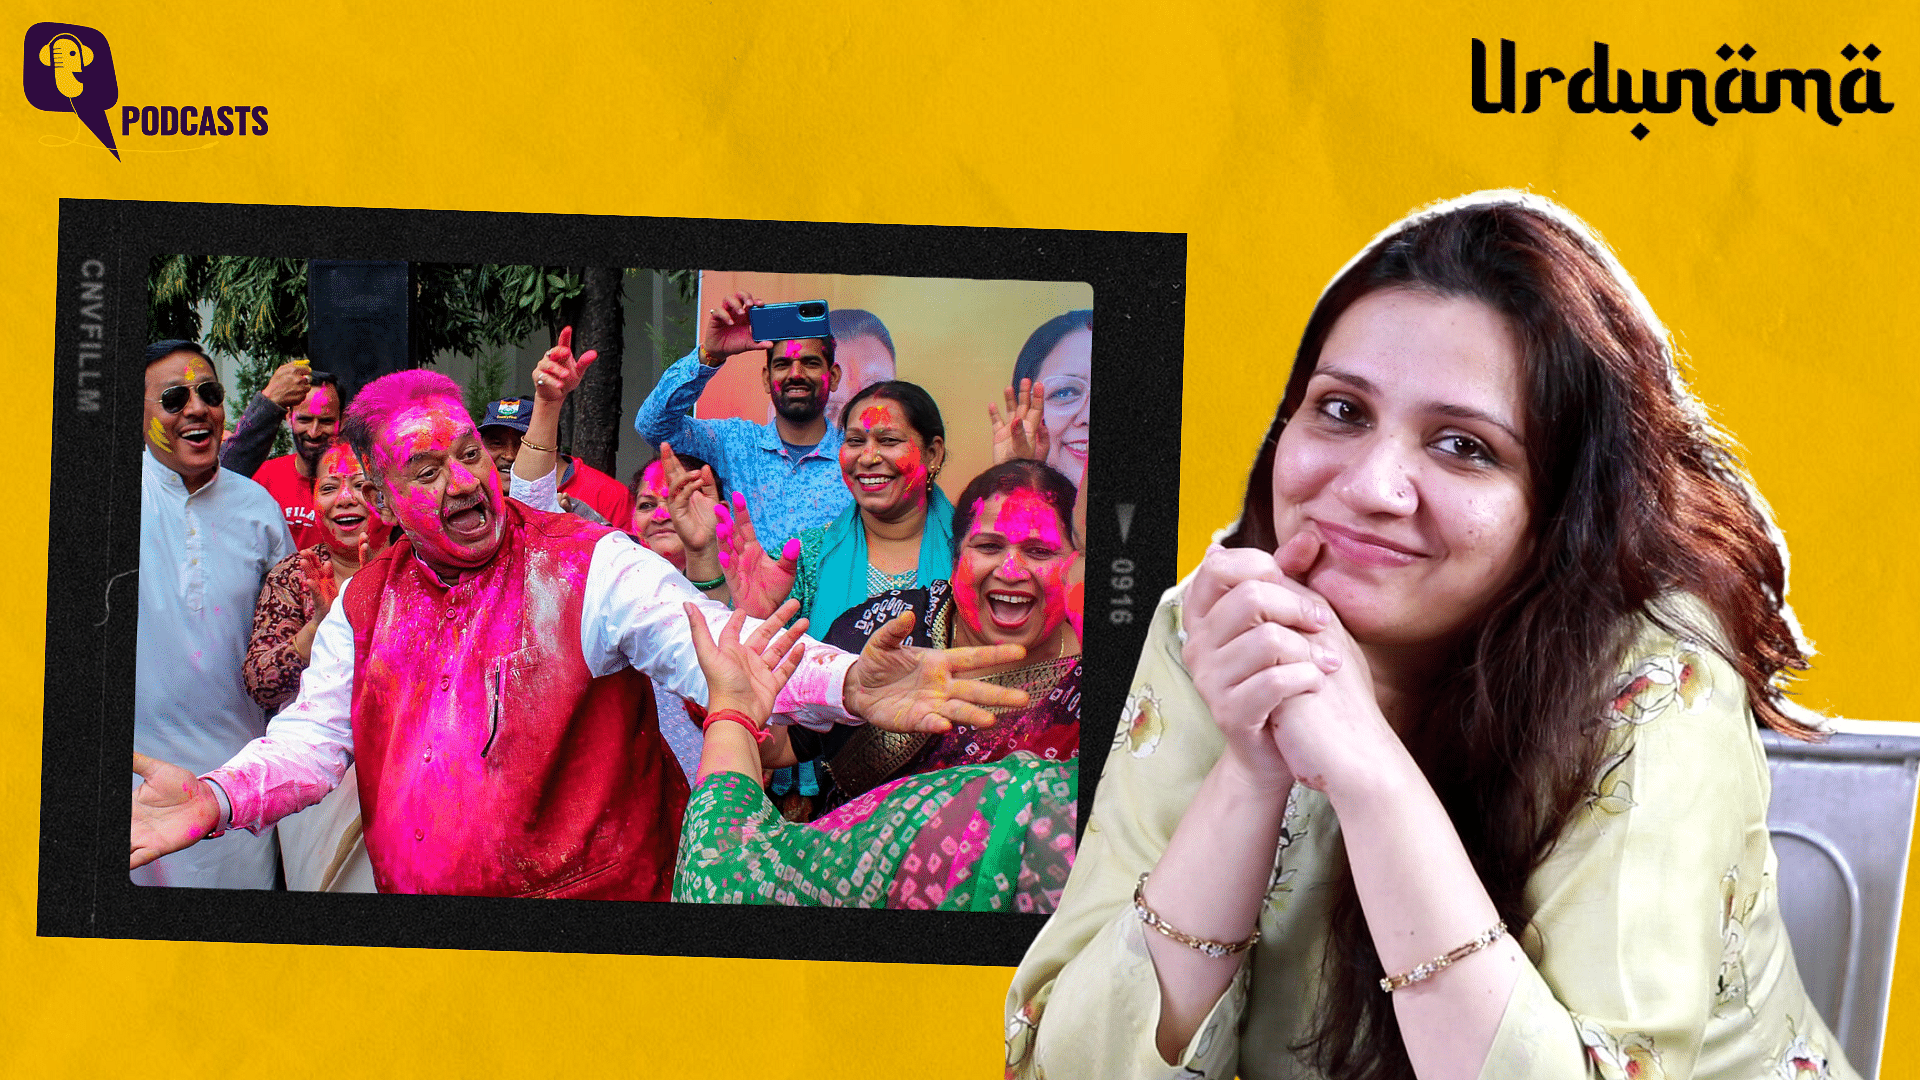 <div class="paragraphs"><p>In this episode of Urdunama. Fabeha Syed talks about the festival 'Holi'.</p></div>